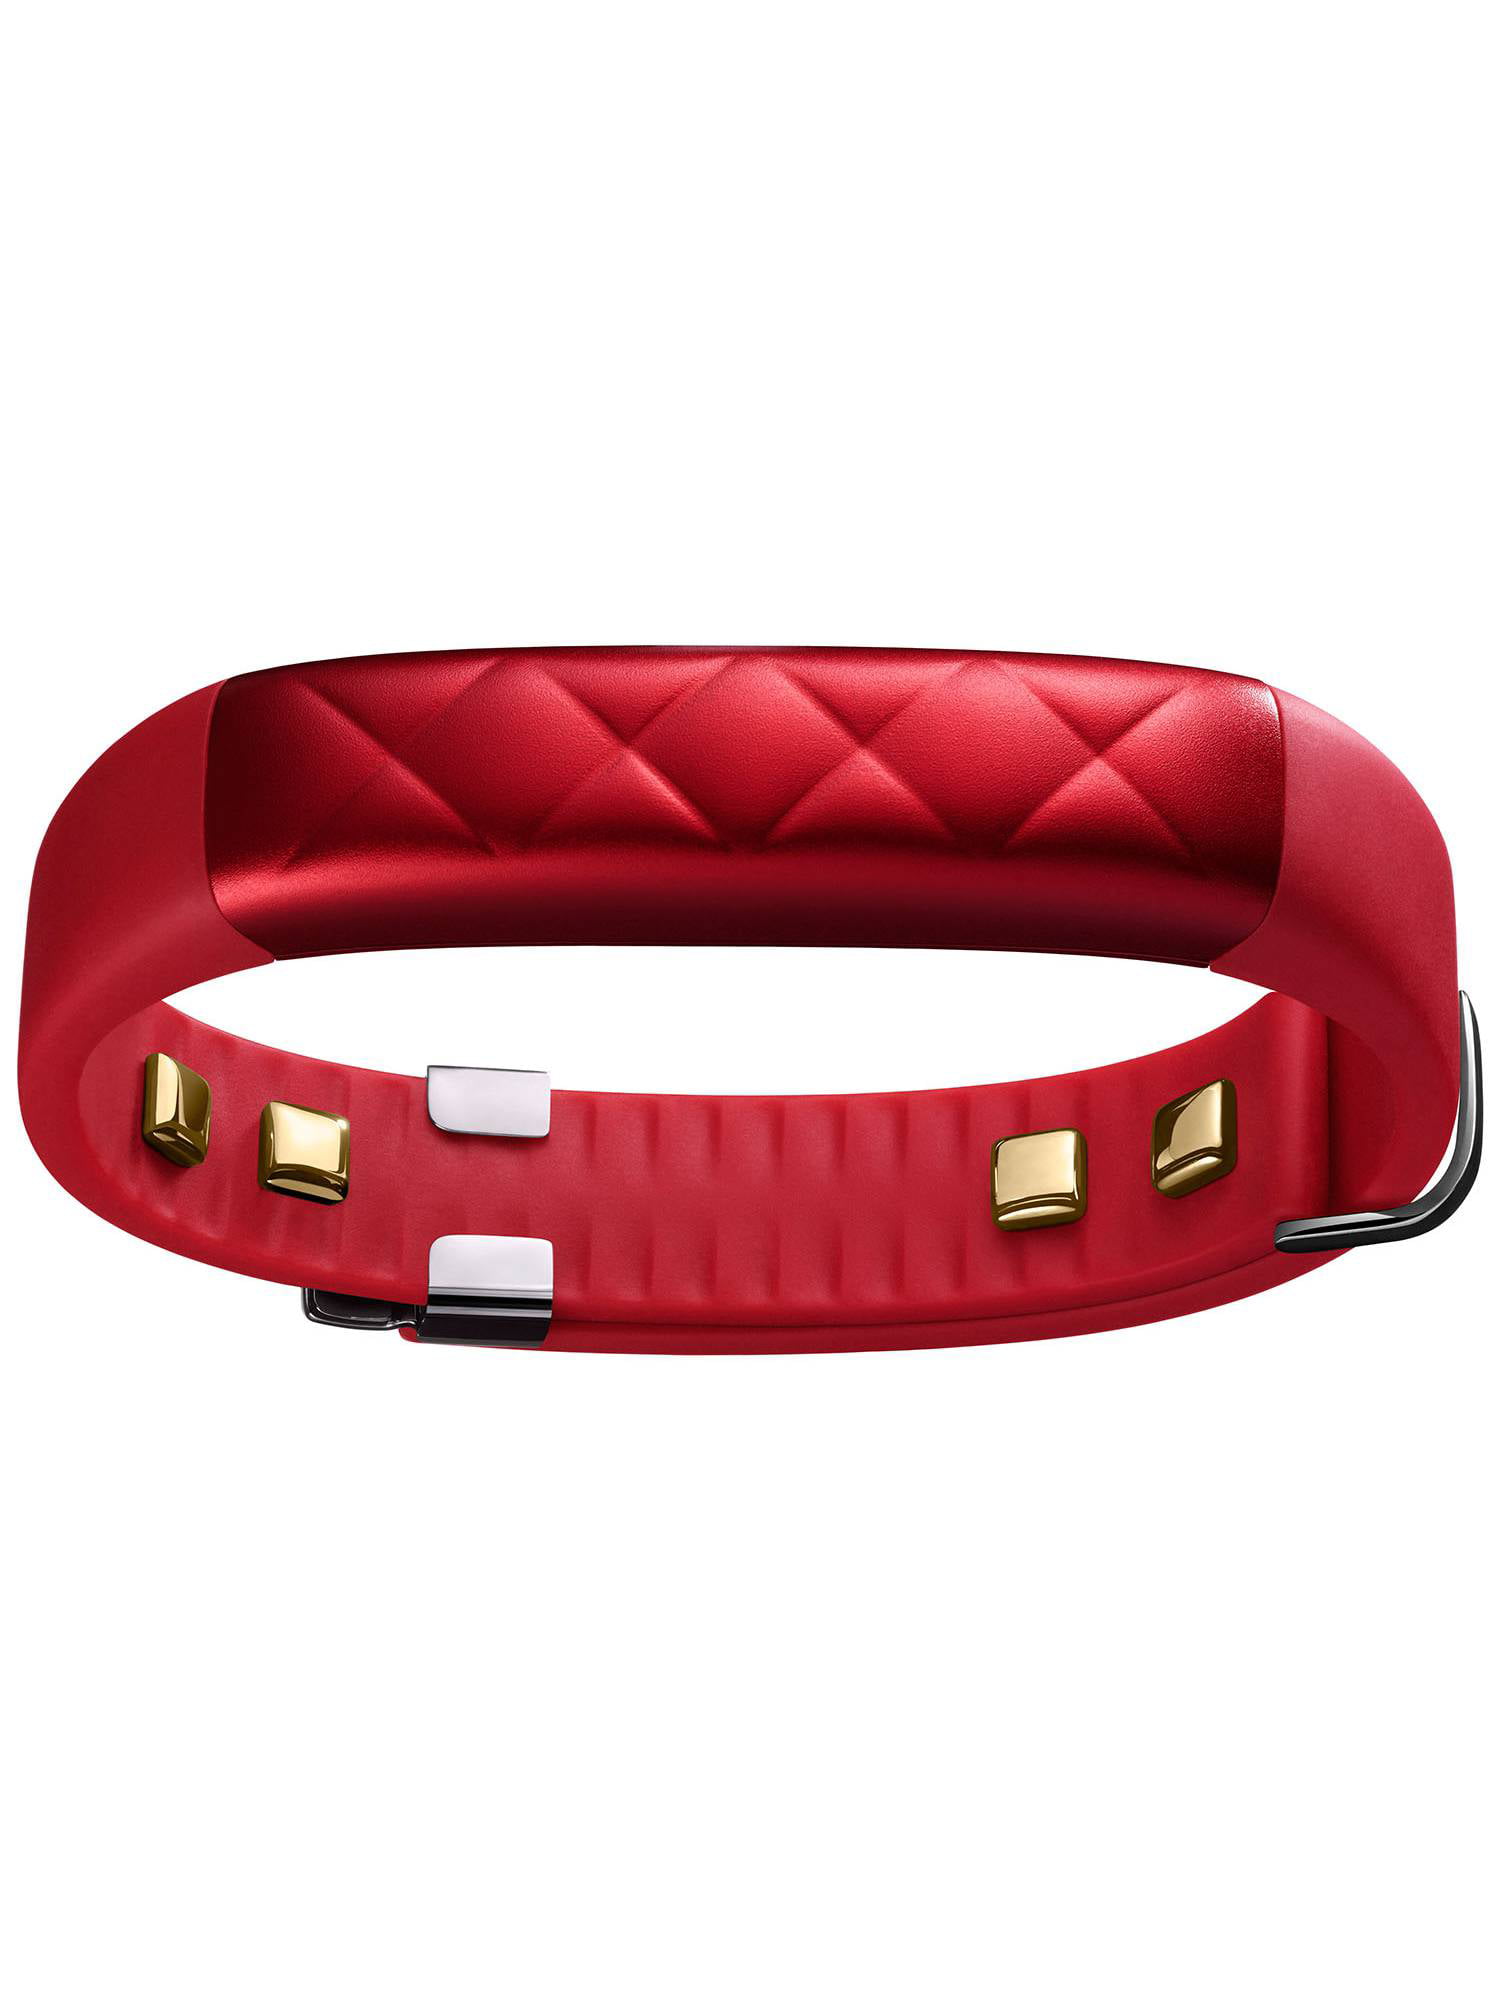 Fitness Tracker Brand New UP3 By Jawbone Ruby 